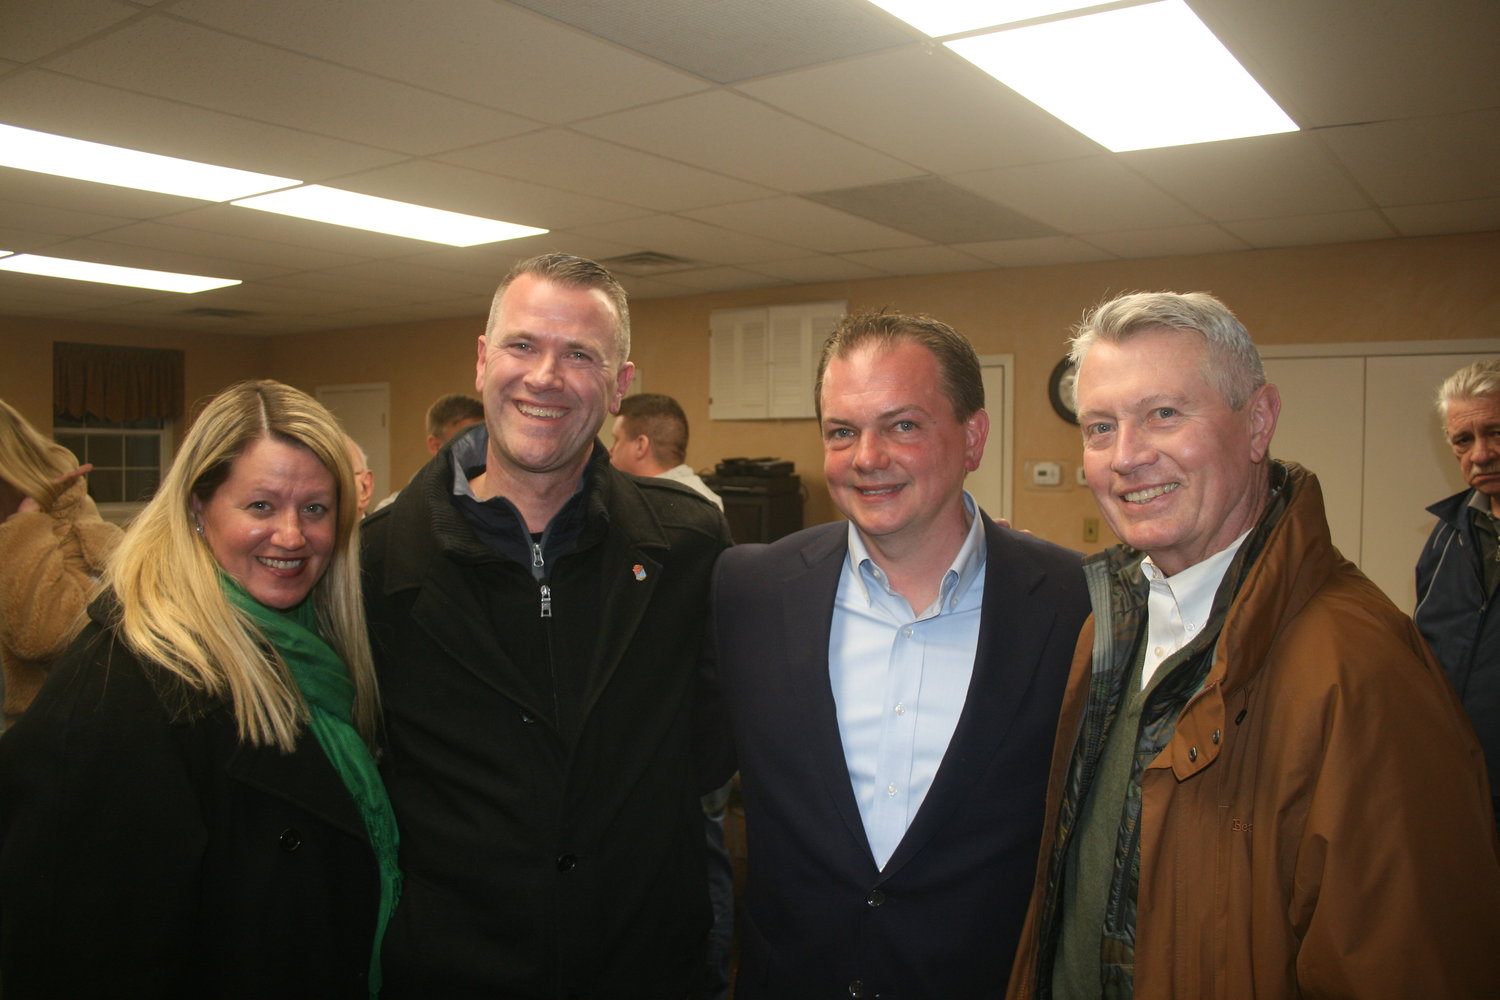 Village Trustee Lori Lang, who was appointed last month and won a special election Tuesday night, is joined by Mayor-elect Tim Sullivan, left, Trustee-elect Scott Edwards and Village Justice Jim Frankie.